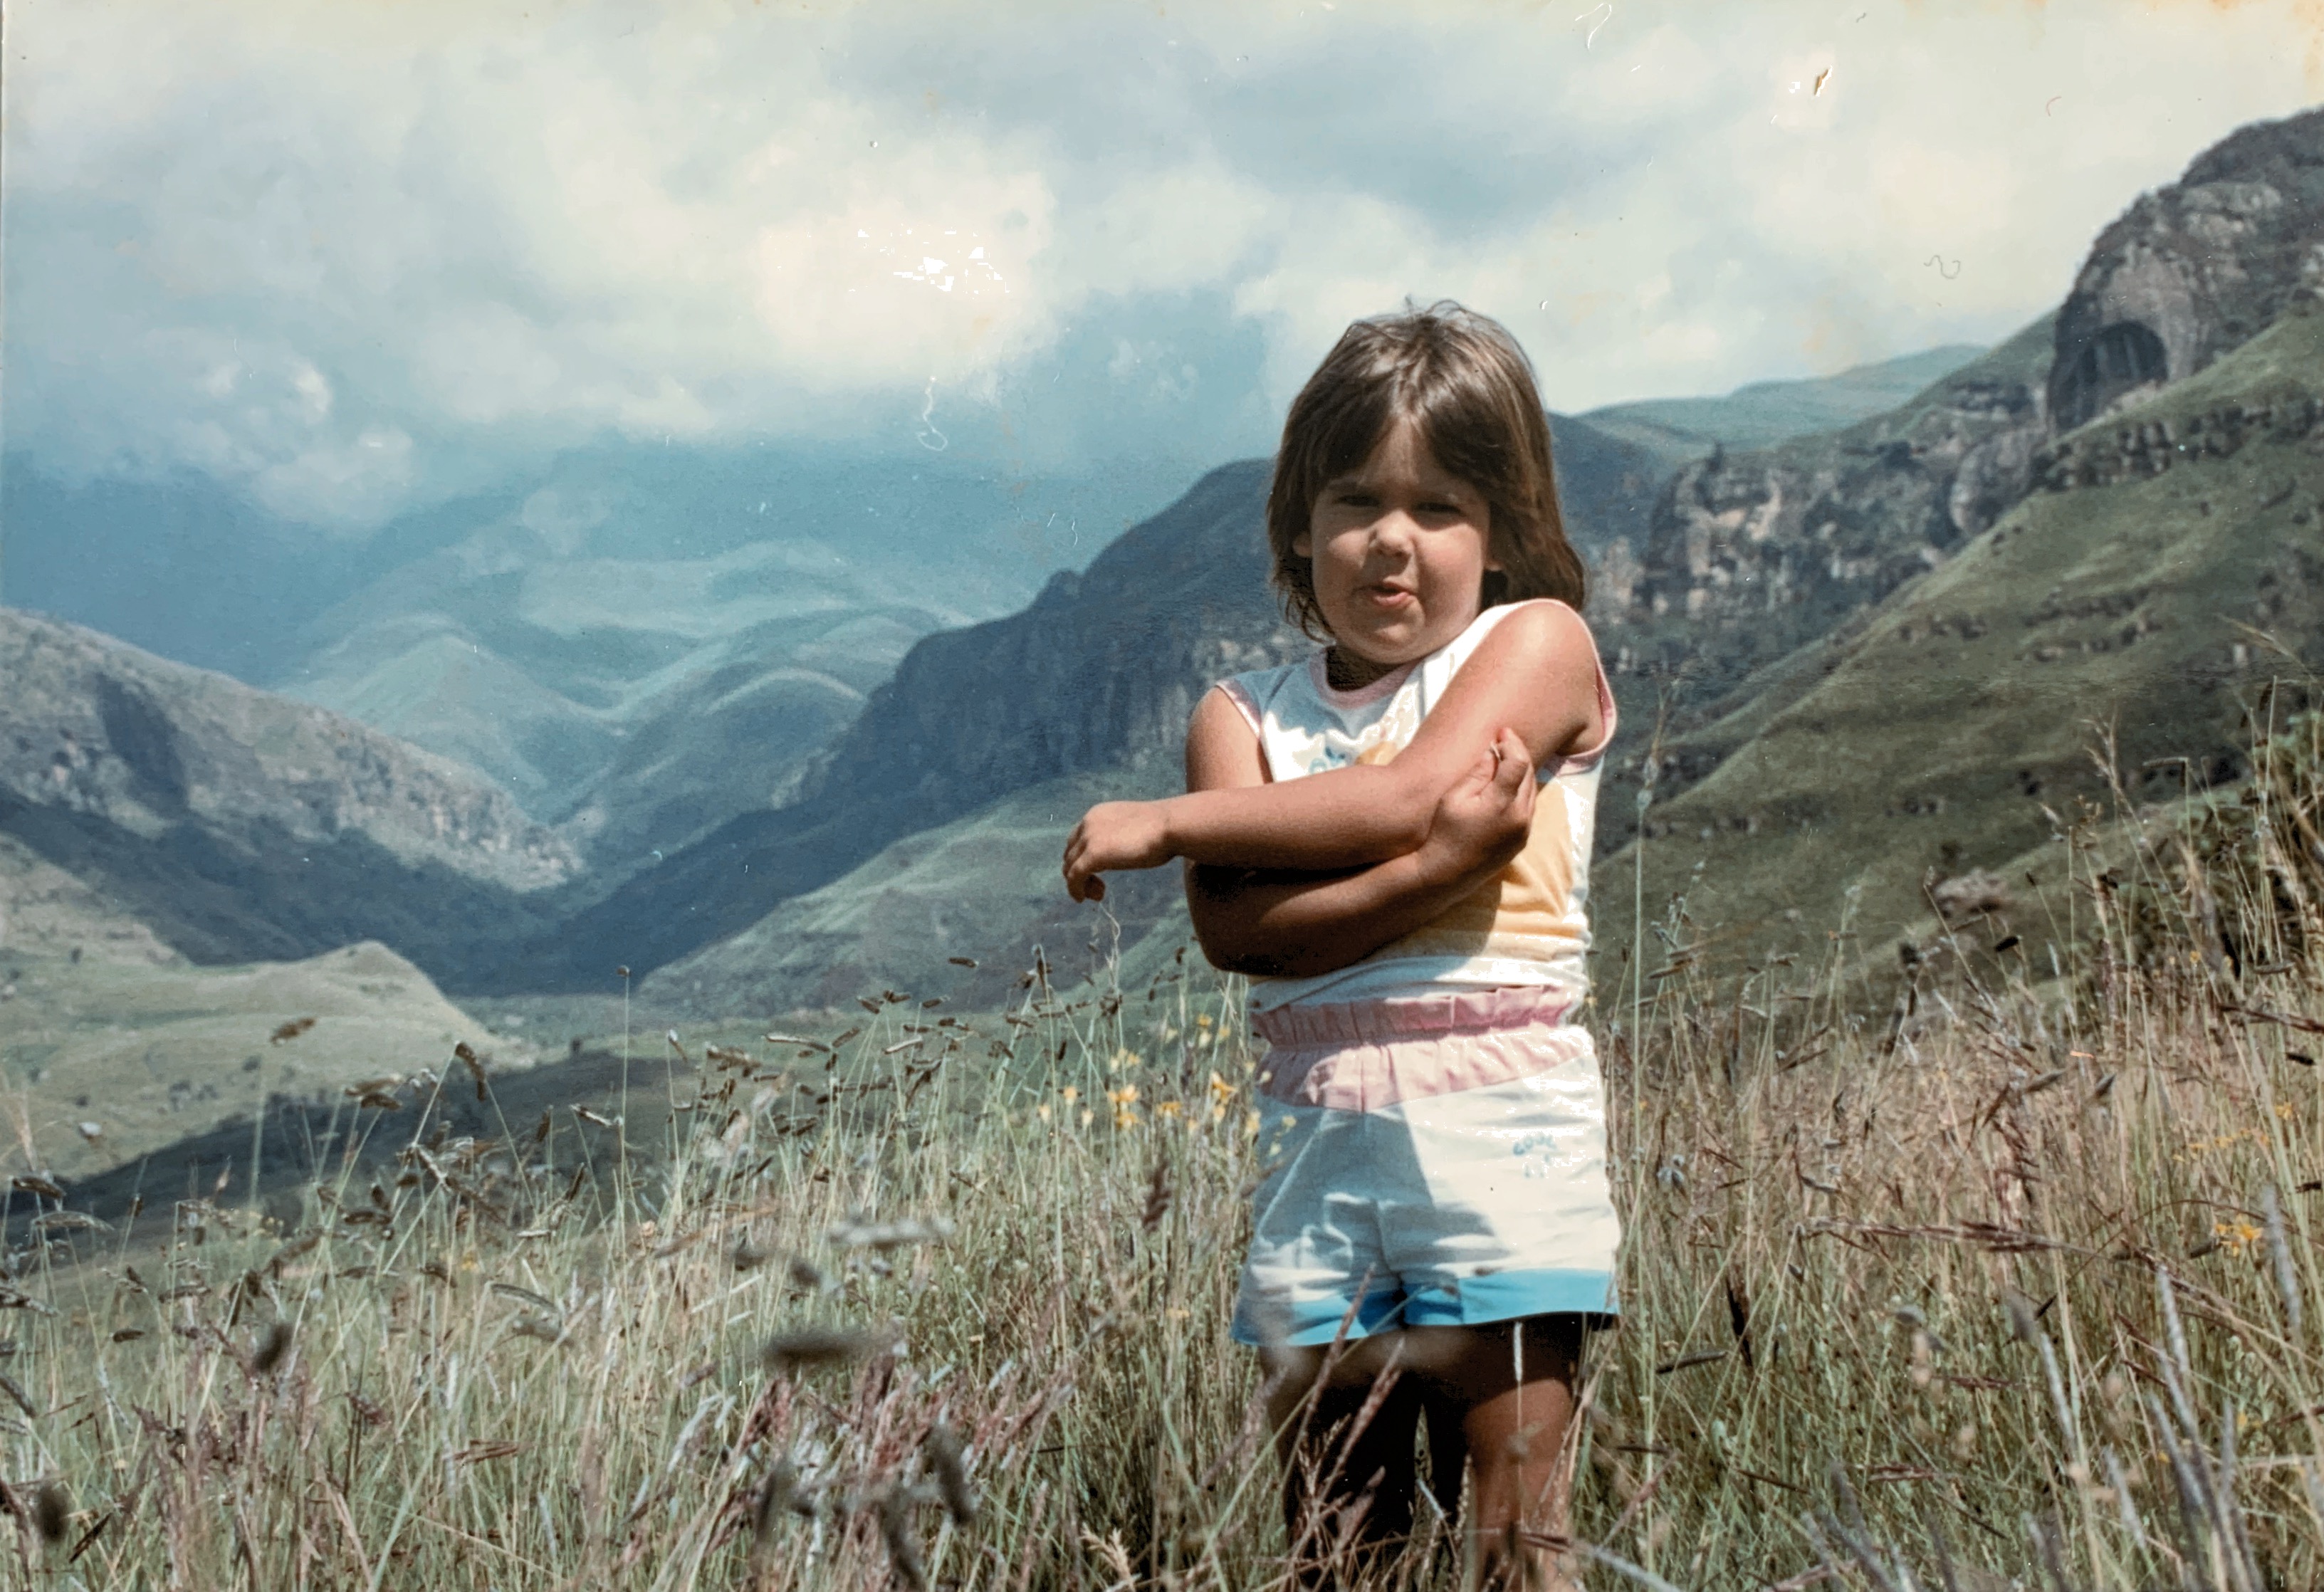 Tracey at Injasuti, end of 1984